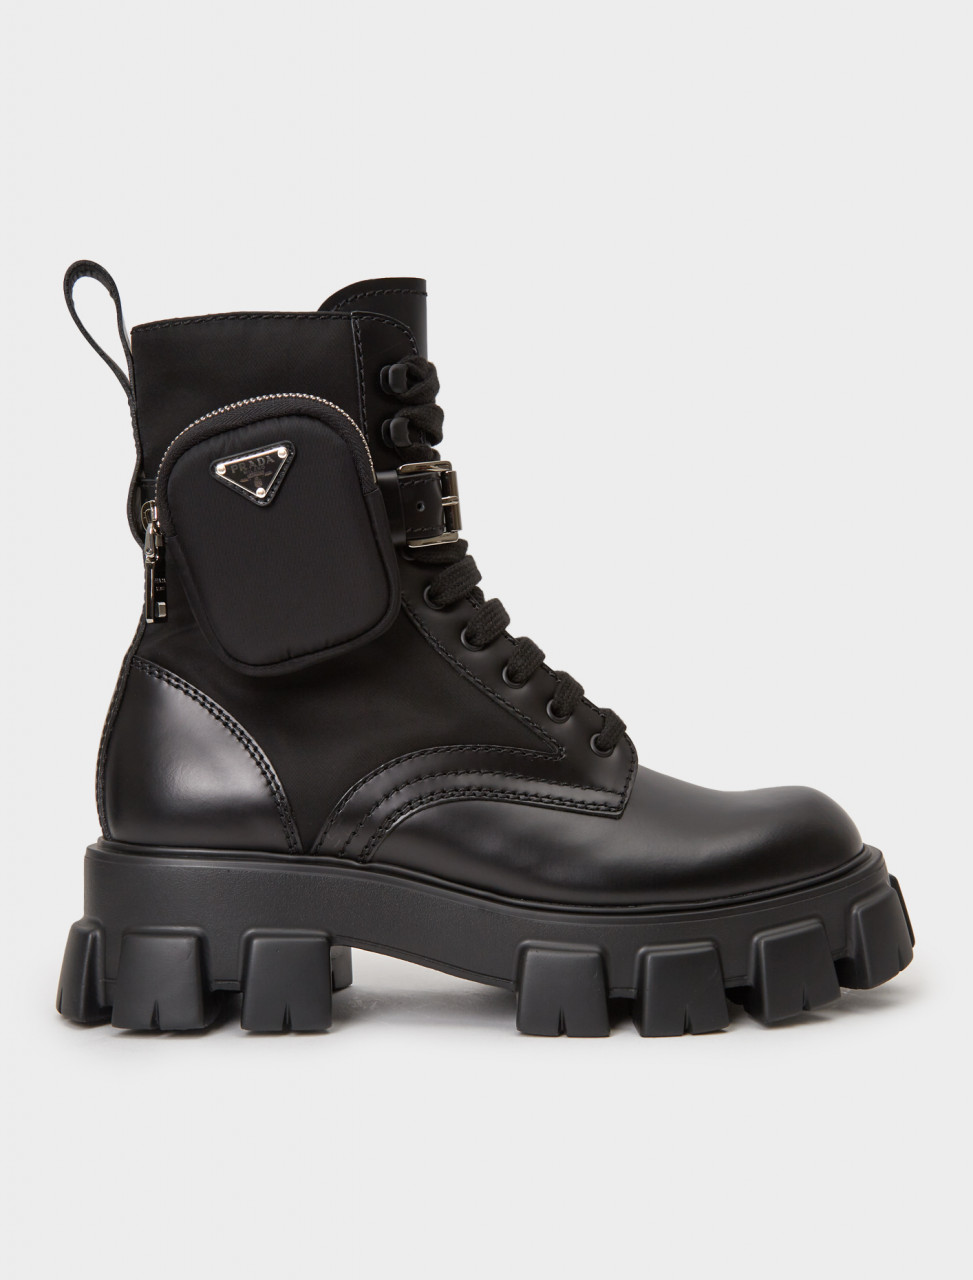 Prada Brushed Leather and Nylon Combat Boot in Black | Voo Store Berlin ...